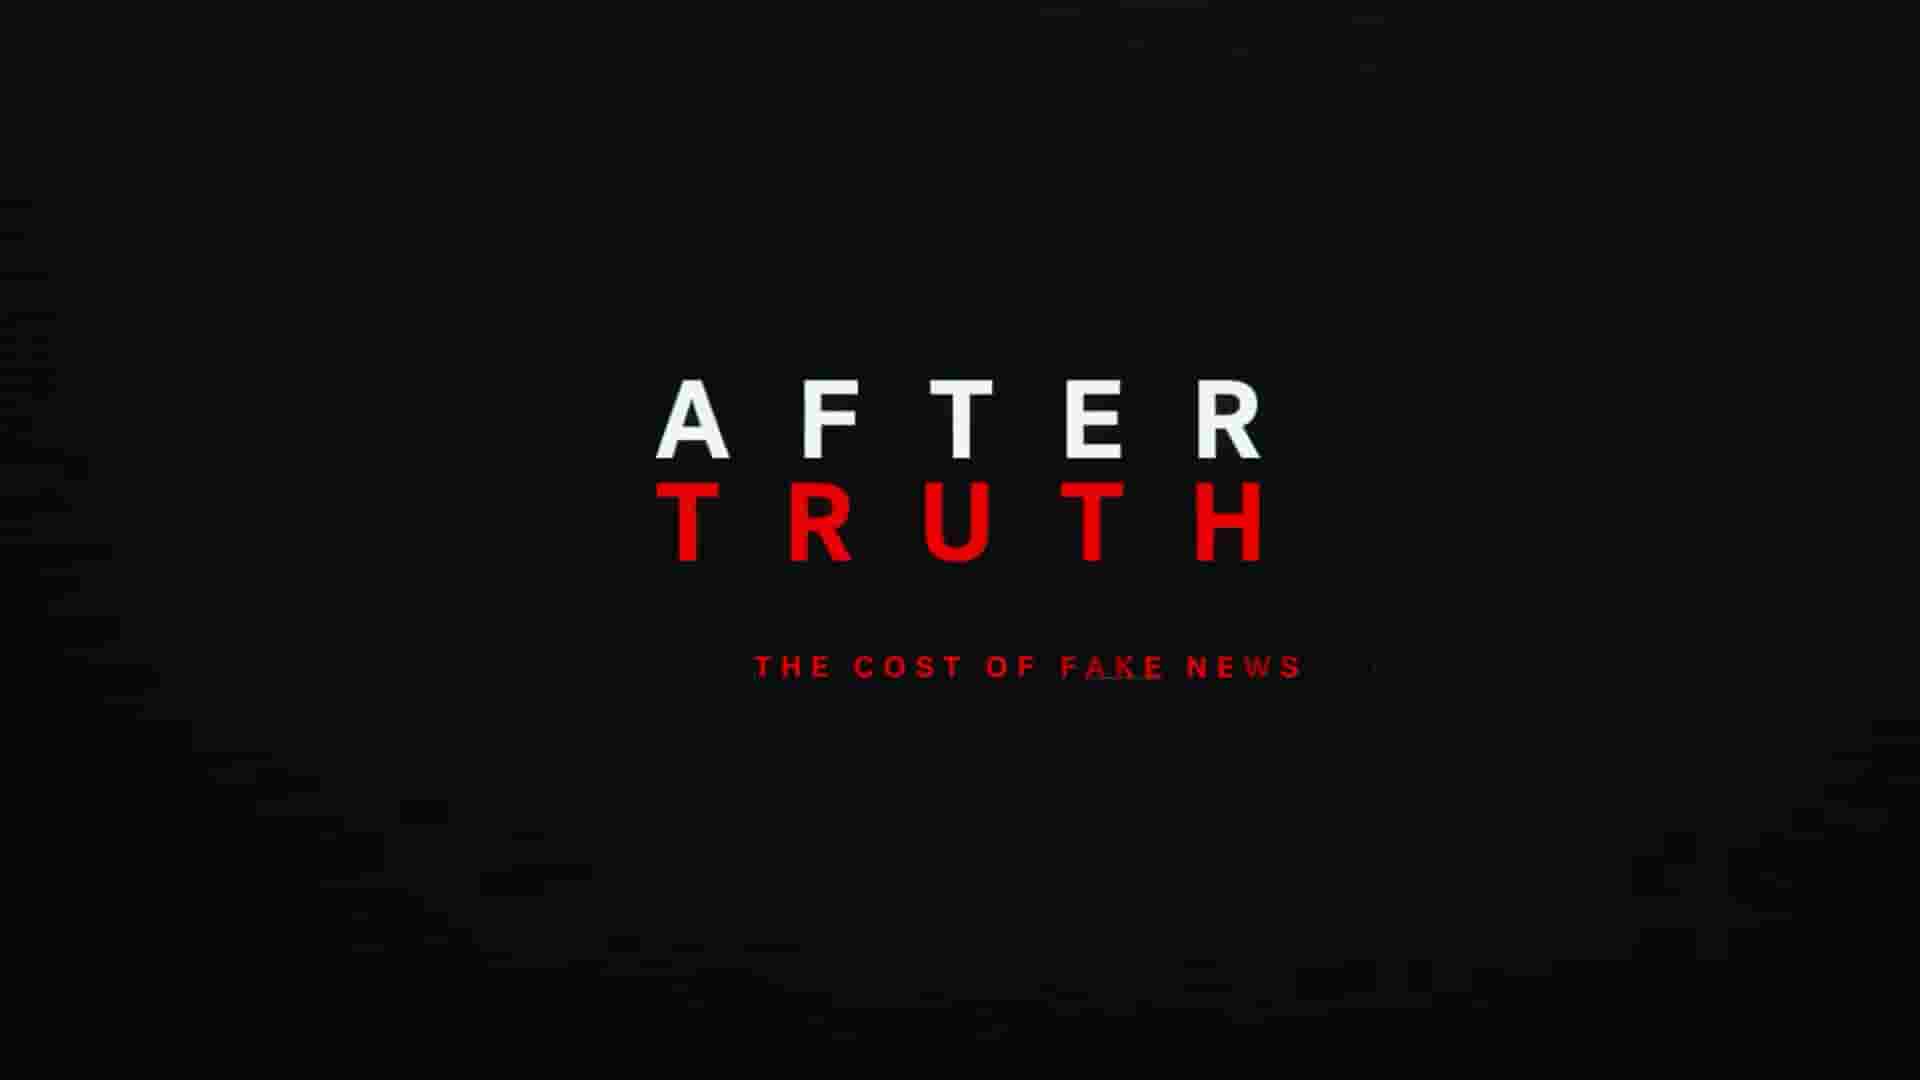 HBO纪录片《真相背后：虚假新闻与信息的代价 After Truth: Disinformation and the Cost of Fake News 2020》全1集 英语中英双字  1080P高清网盘下载